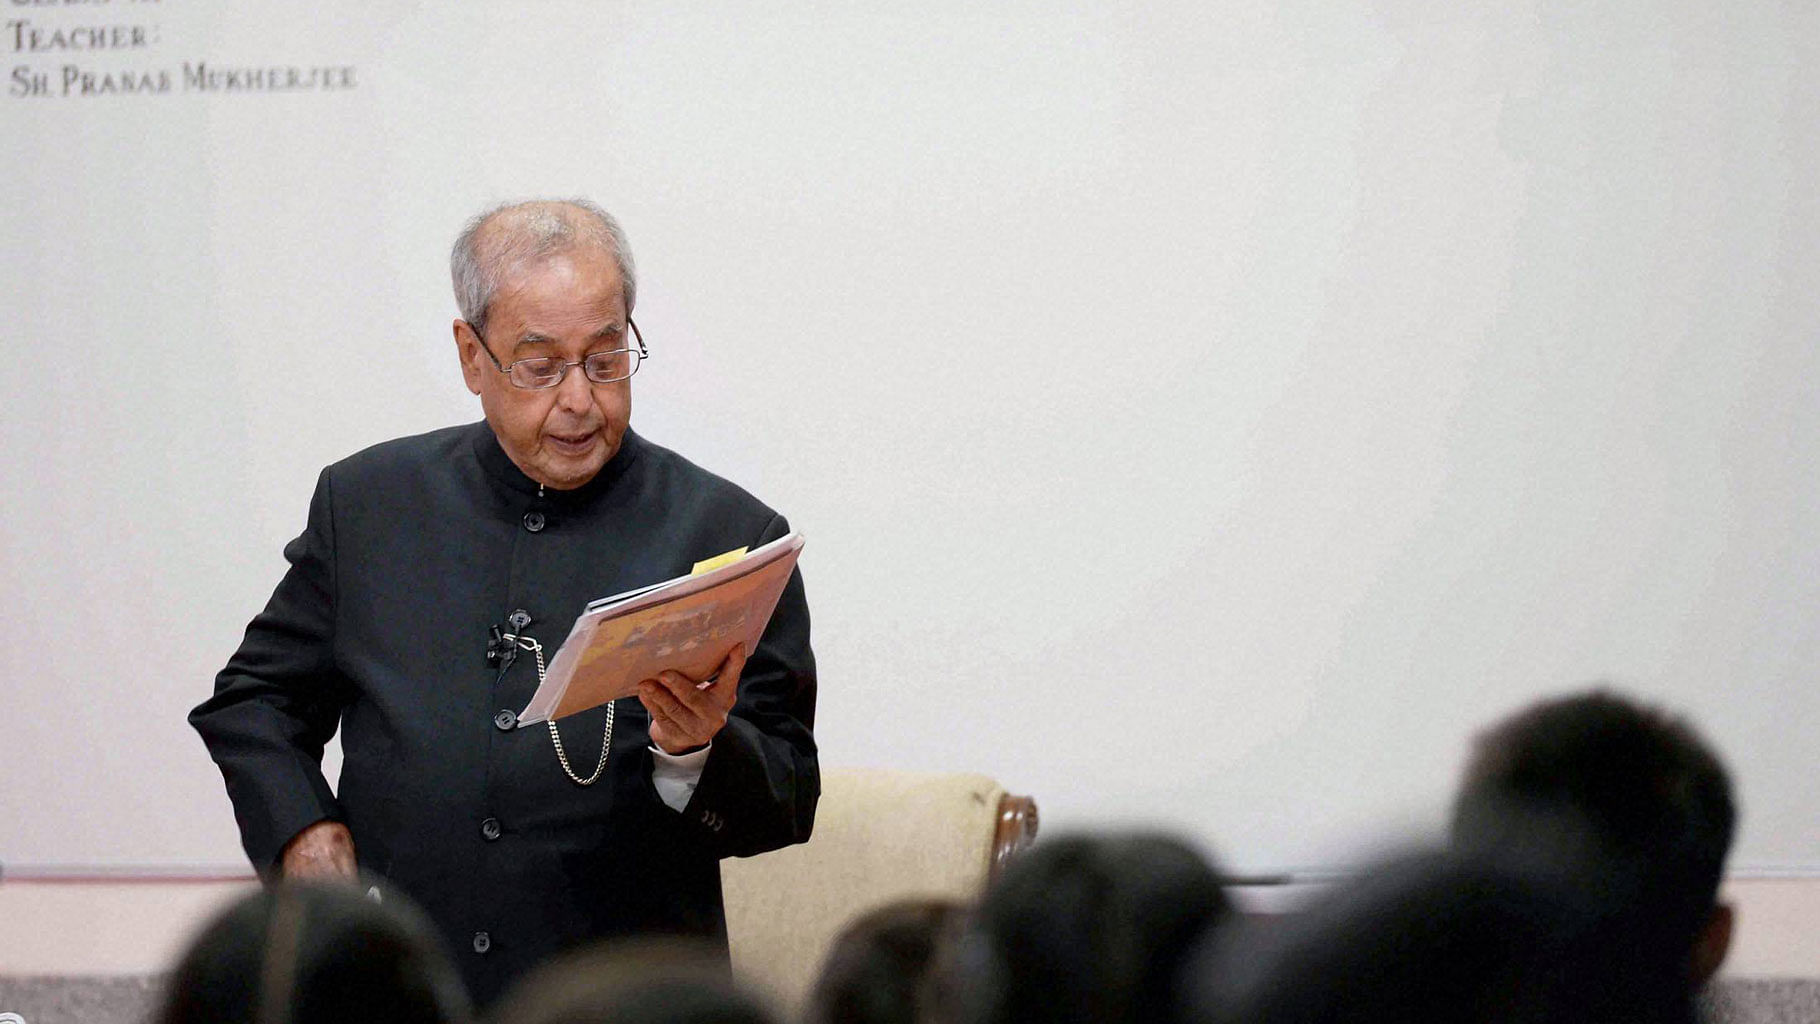 File image of former President Pranab Mukherjee teaching students in a class in a Government School on the occasion of Teachers Day in New Delhi on Monday, 5 September 2016.&nbsp;